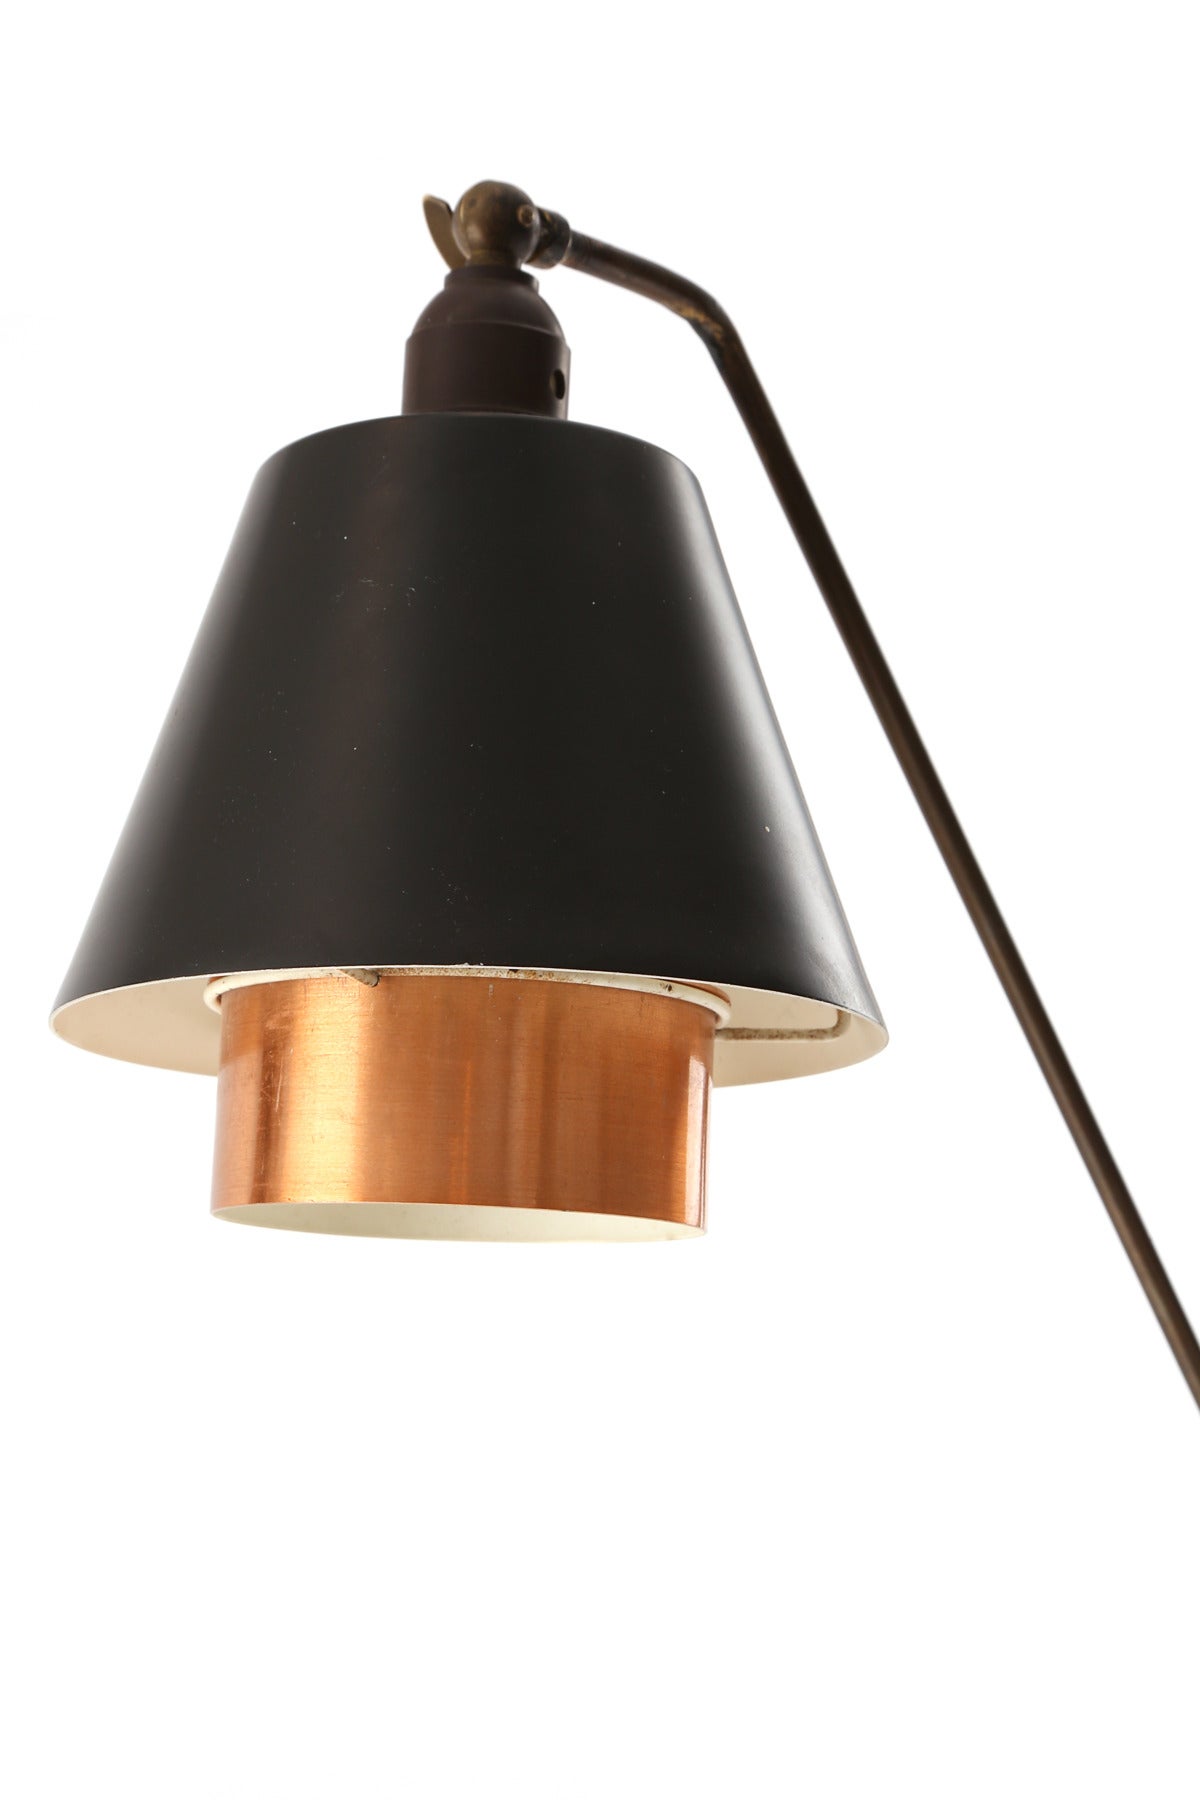 Mid-20th Century Wrapped Metal and Copper Swedish Floor Lamp